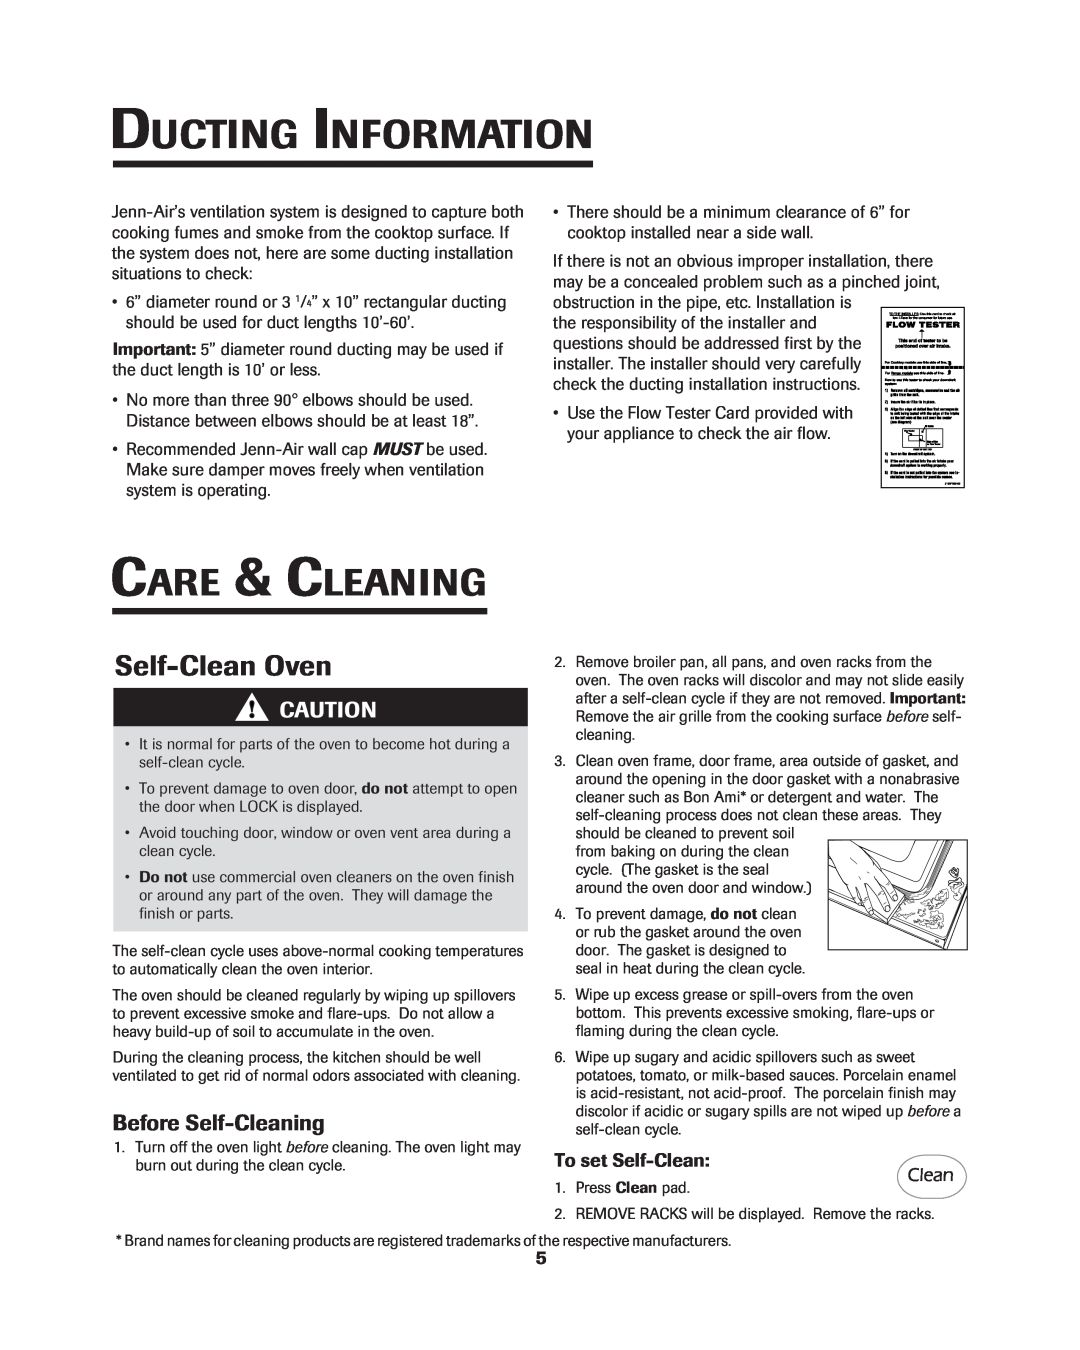 Jenn-Air 8113P754-60 Ducting Information, Care & Cleaning, Before Self-Cleaning, To set Self-Clean, Self-Clean Oven 